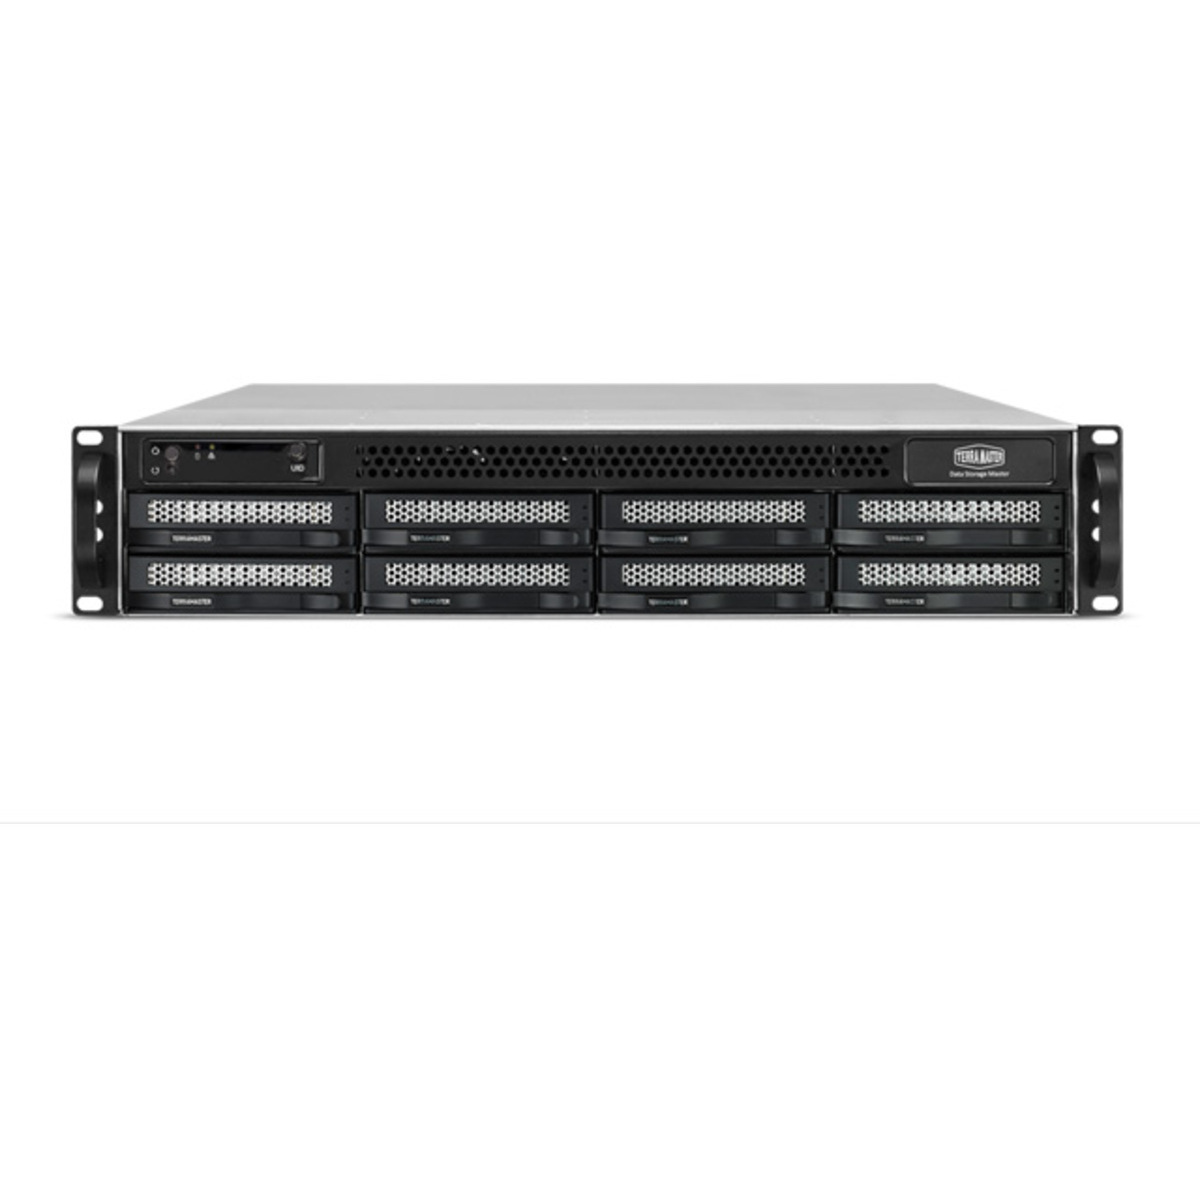 TerraMaster U8-111 NAS - Network Attached Storage Device Burn-In Tested Configurations